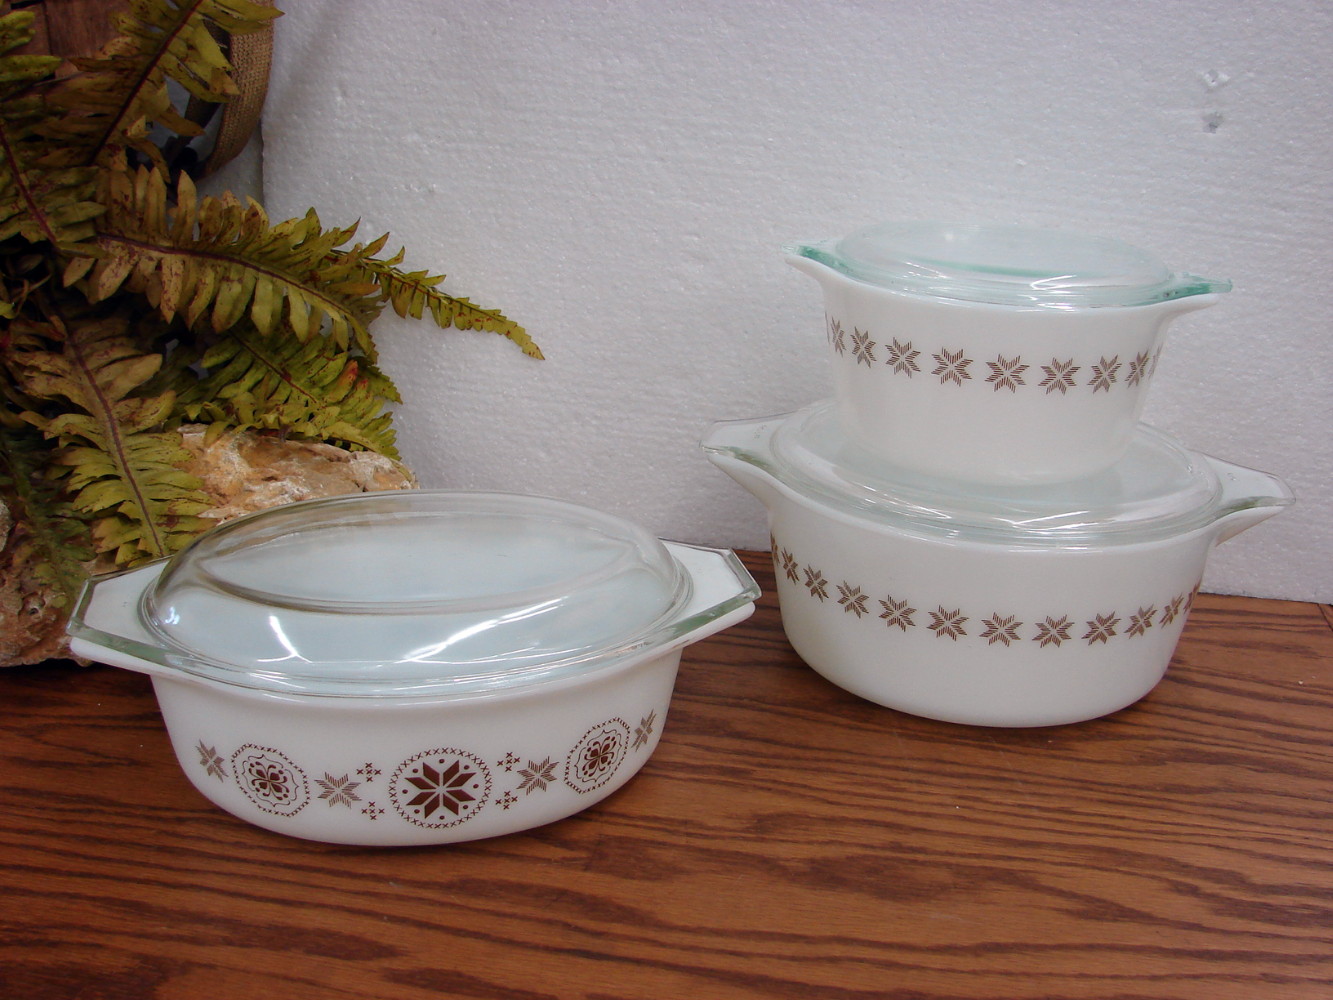 Vintage Pyrex Town and Country Divided Casserole Dish 1 1/2 